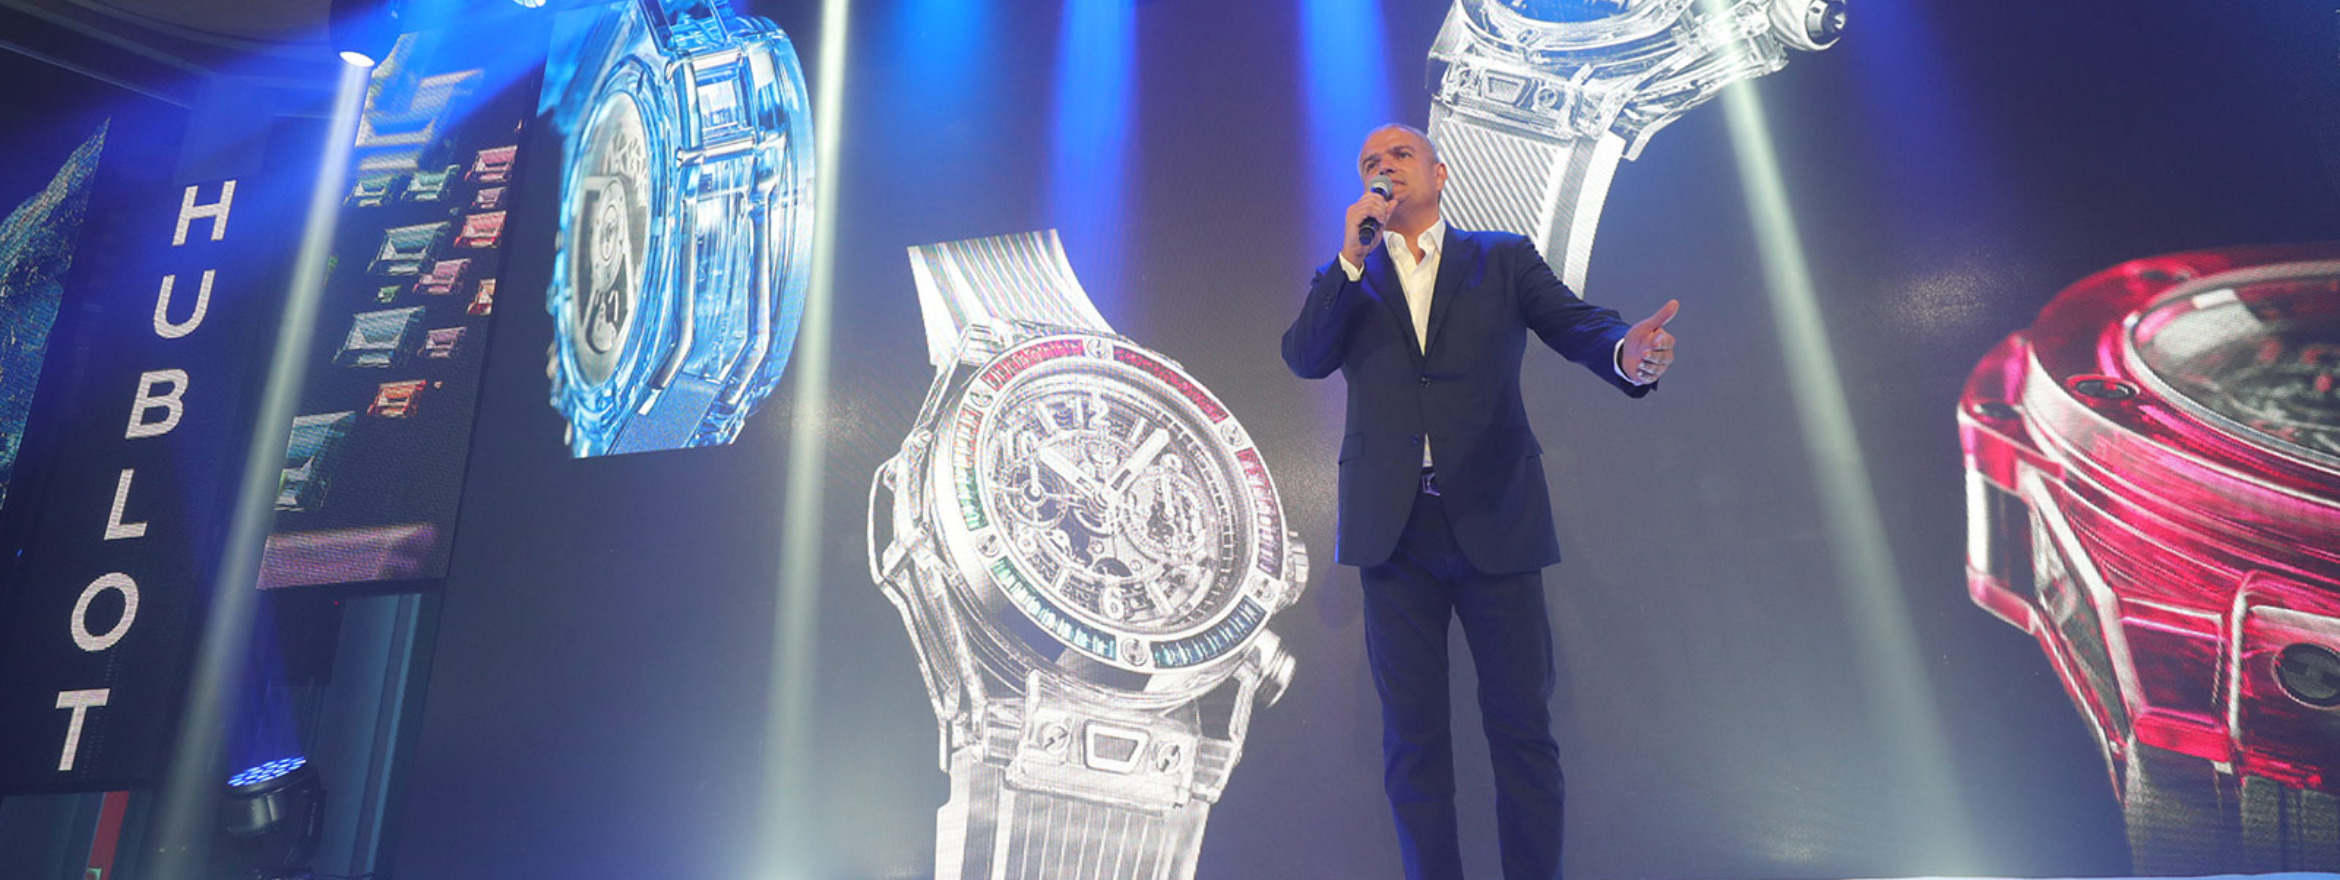 Sapphire Night with Hublot & PMT The Hour Glass